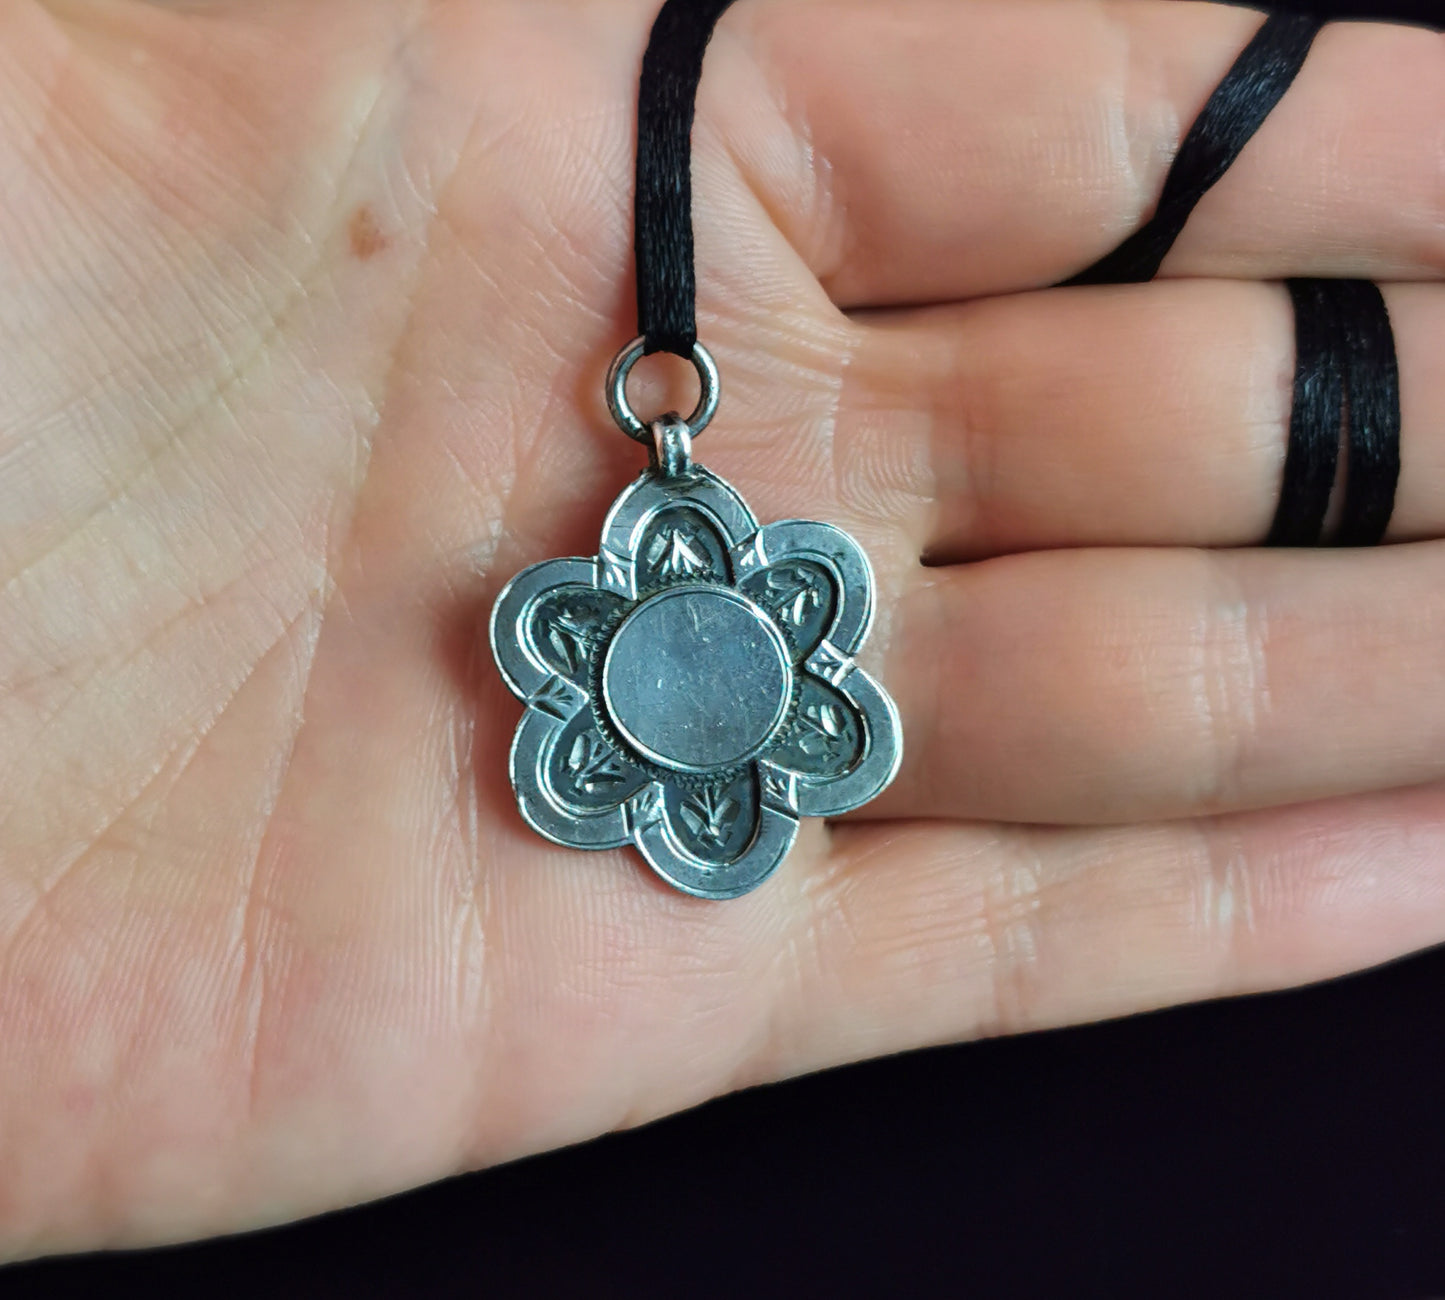 Antique sterling silver Flower shaped fob pendant